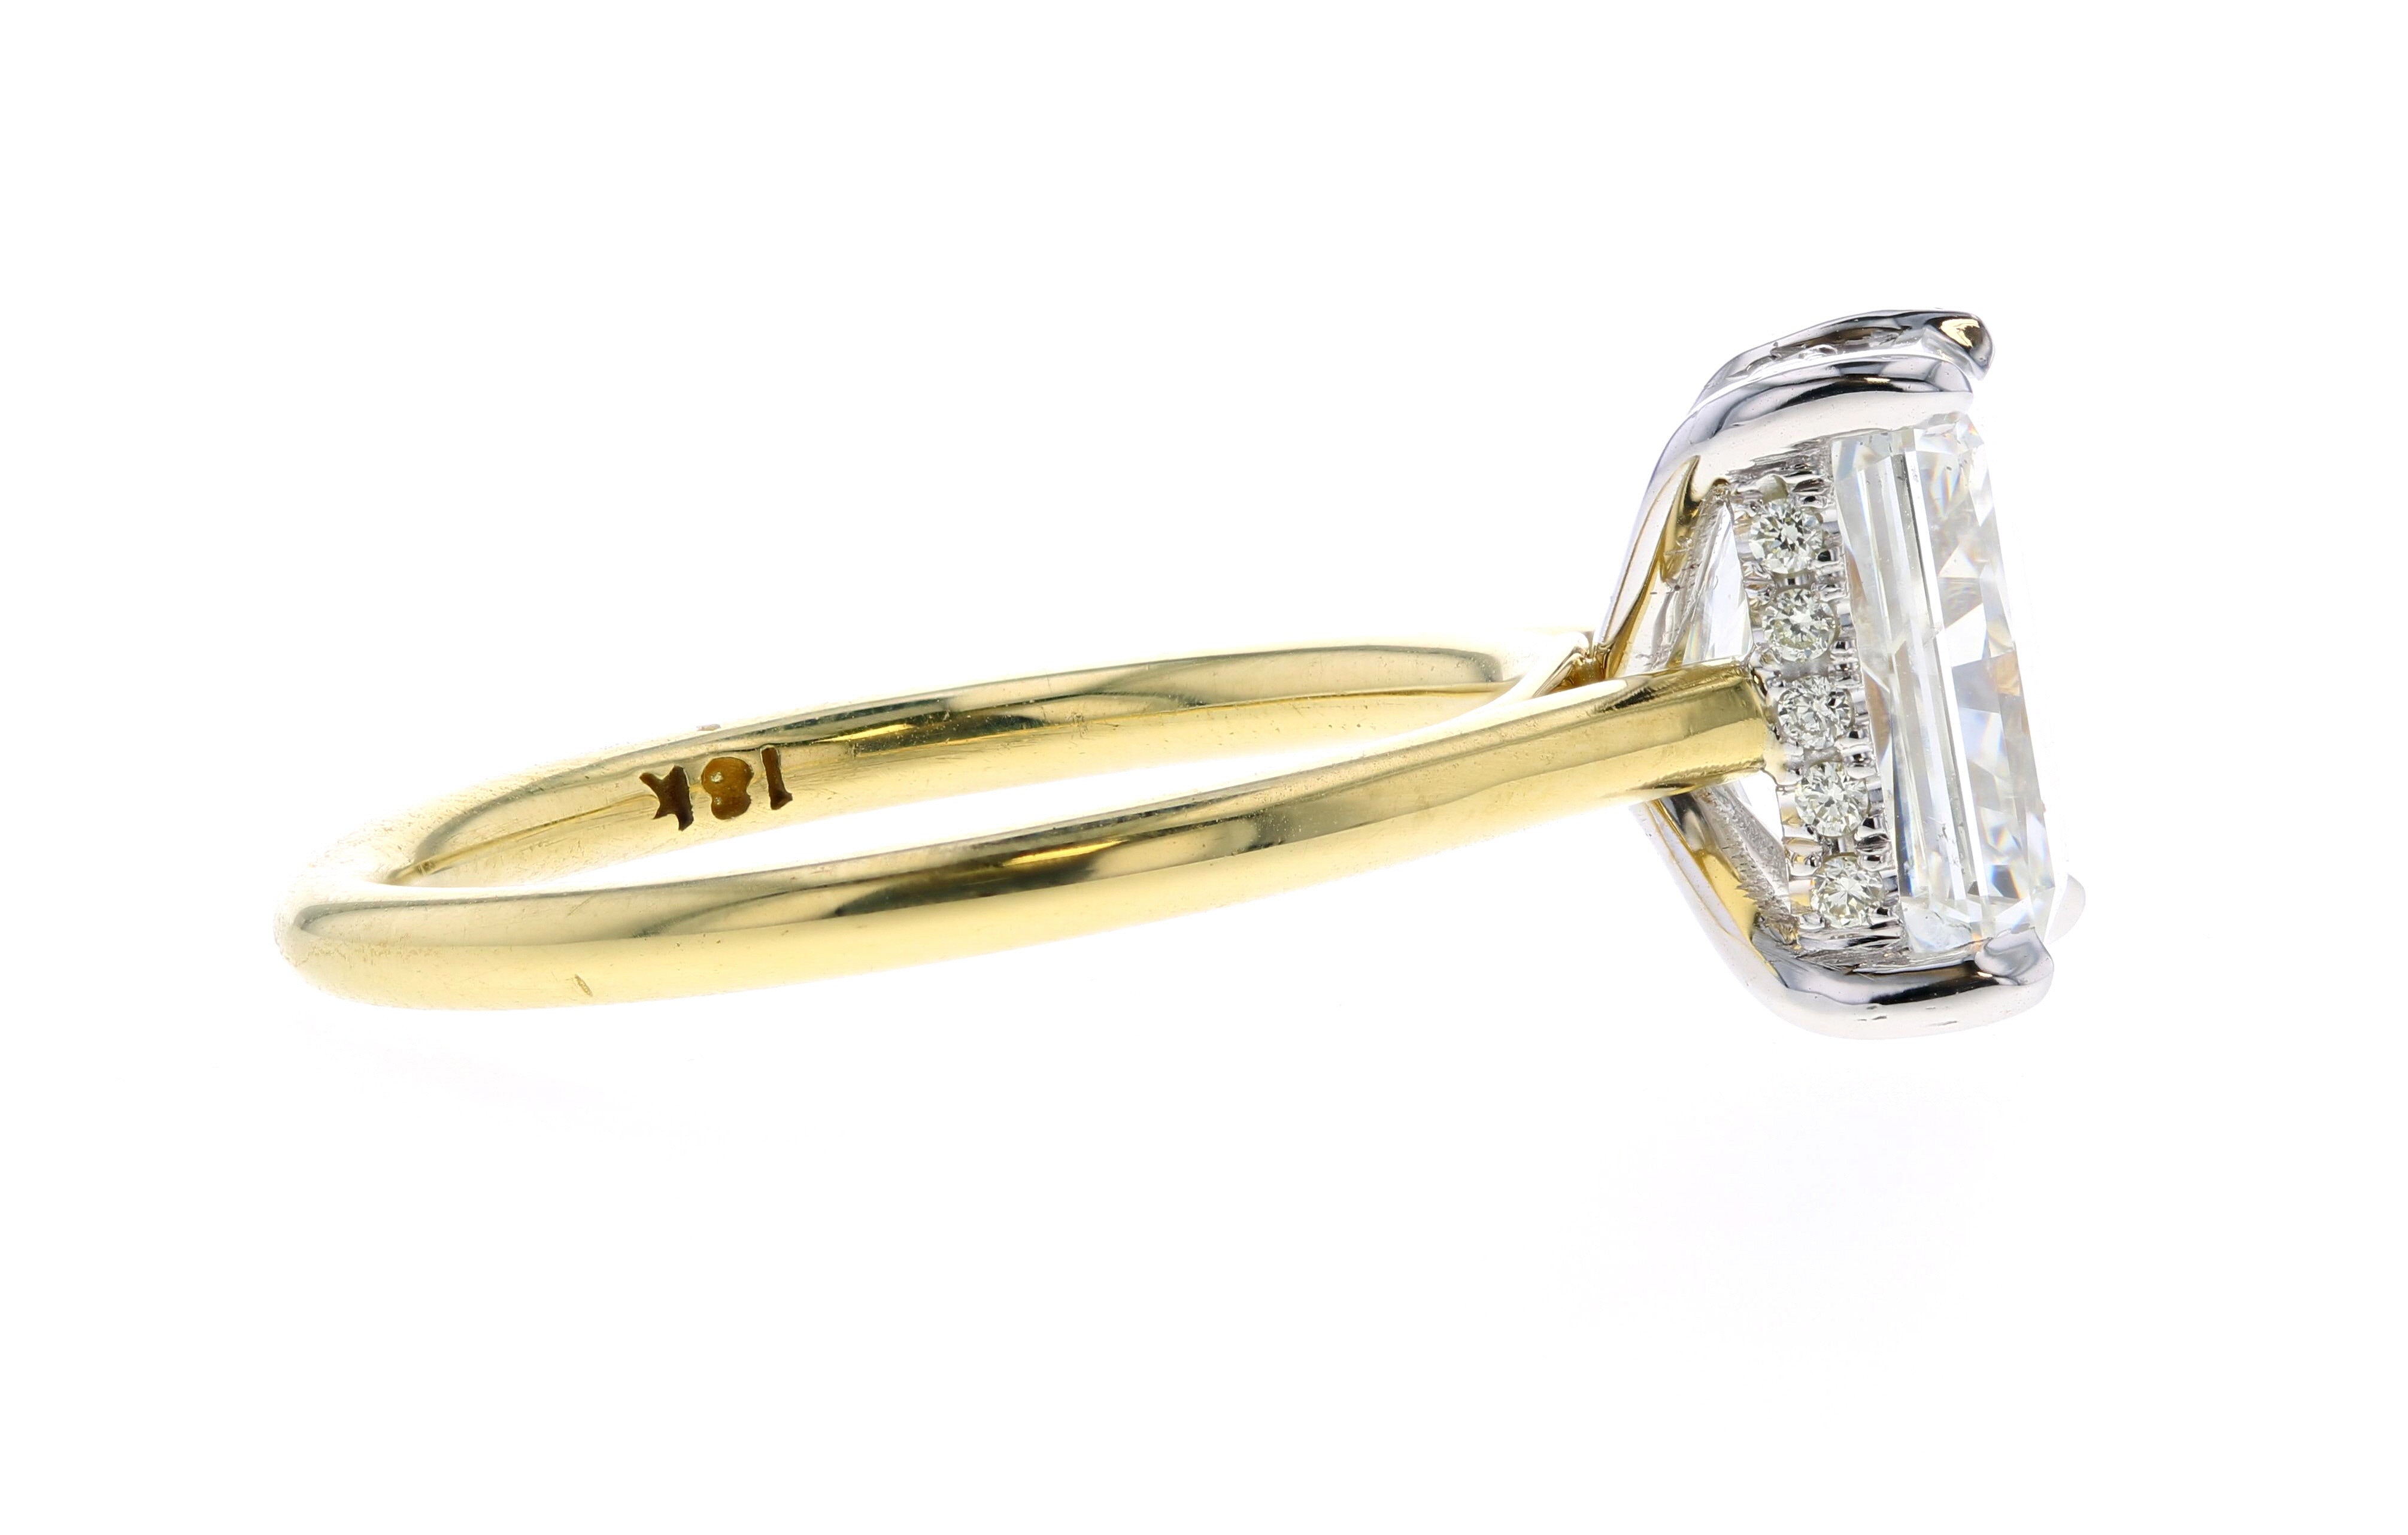 Radiant Cut Diamond Engagement Ring in Two-Tone Yellow & White Gold with Hidden Diamond Halo